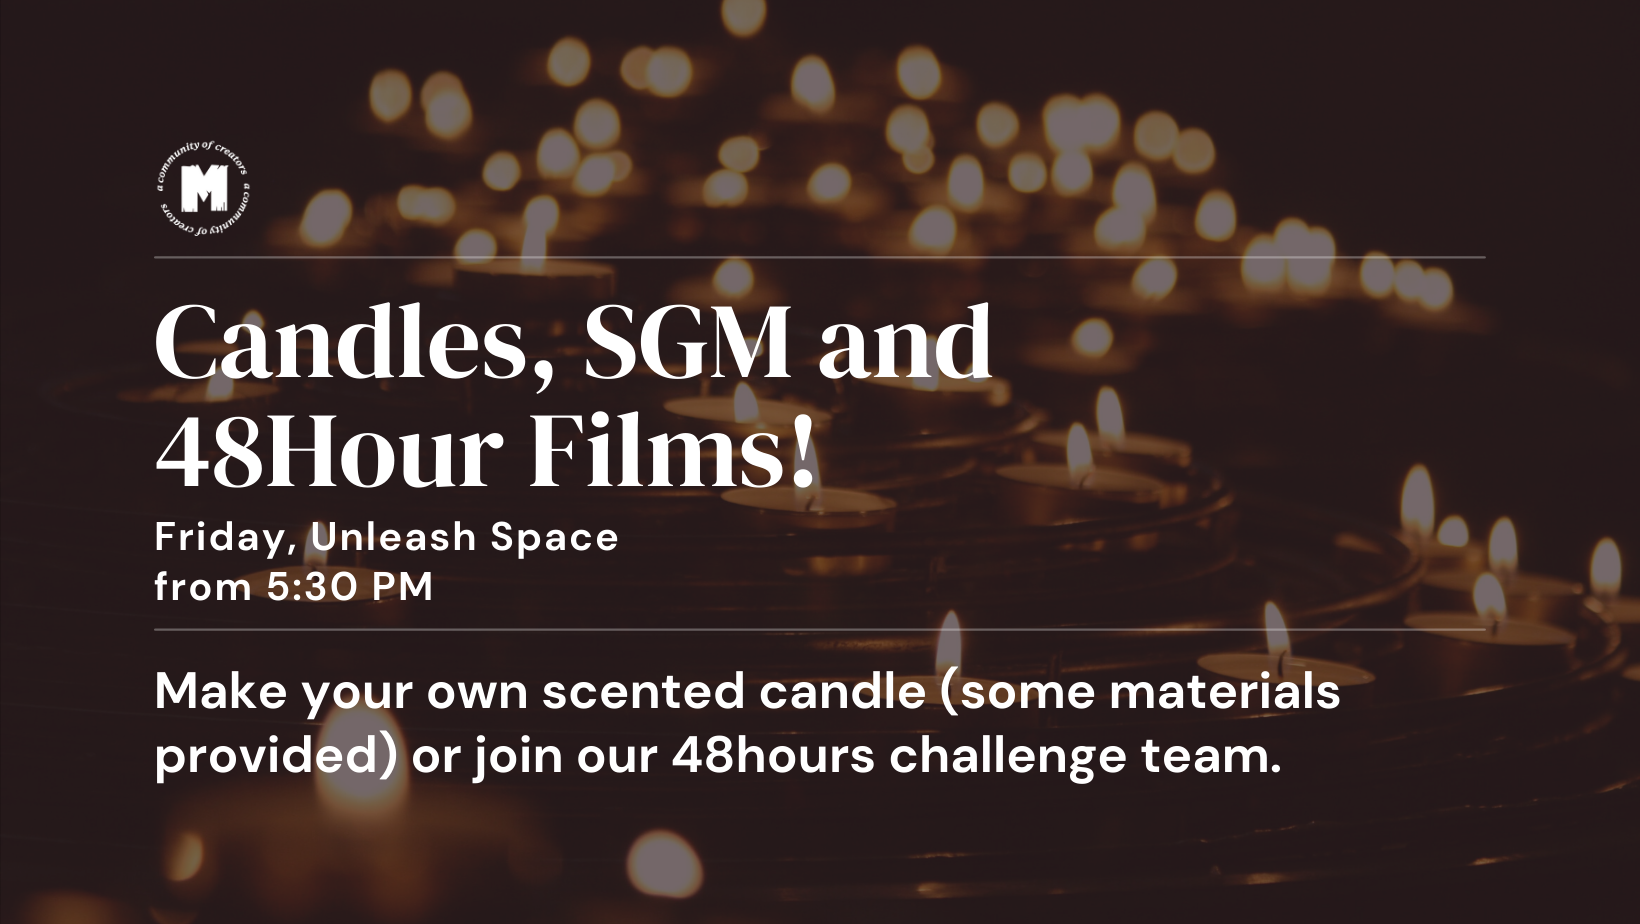 Friday the 12th: Candles, SGM and 48Hour Films!